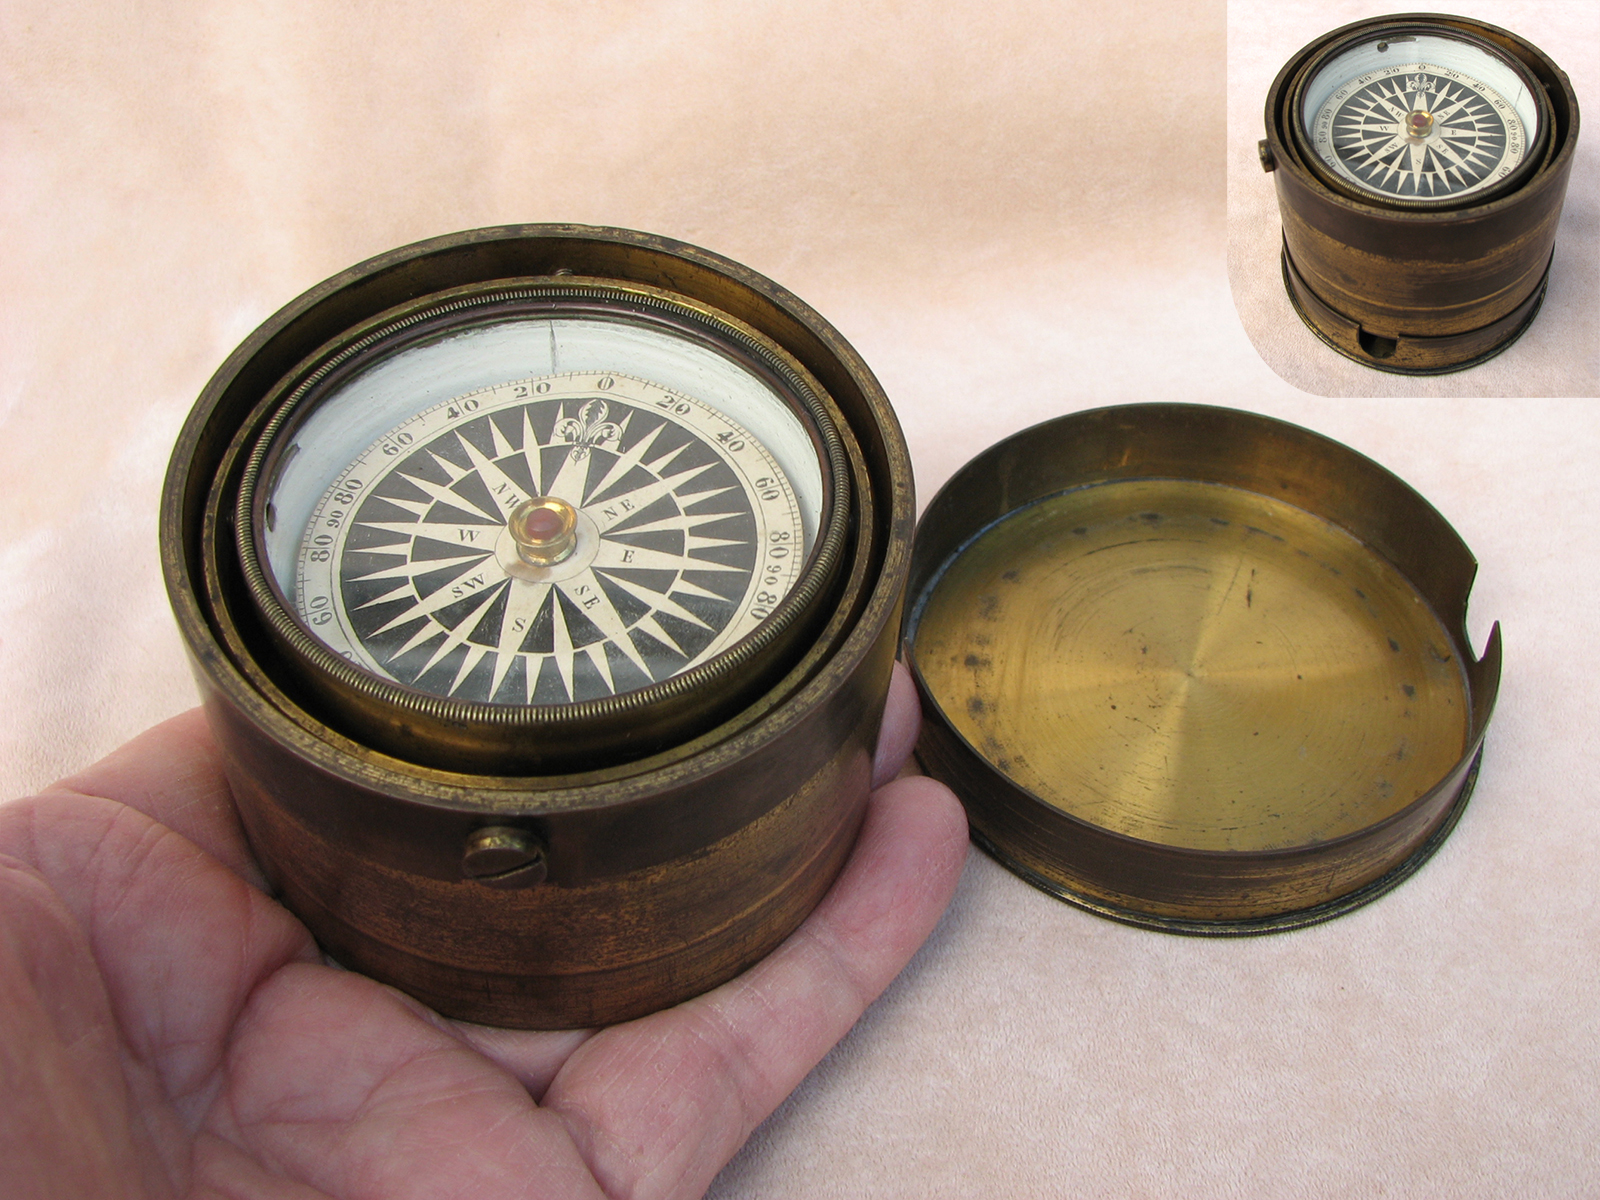 19th century Mariners gimbal mounted small boat compass